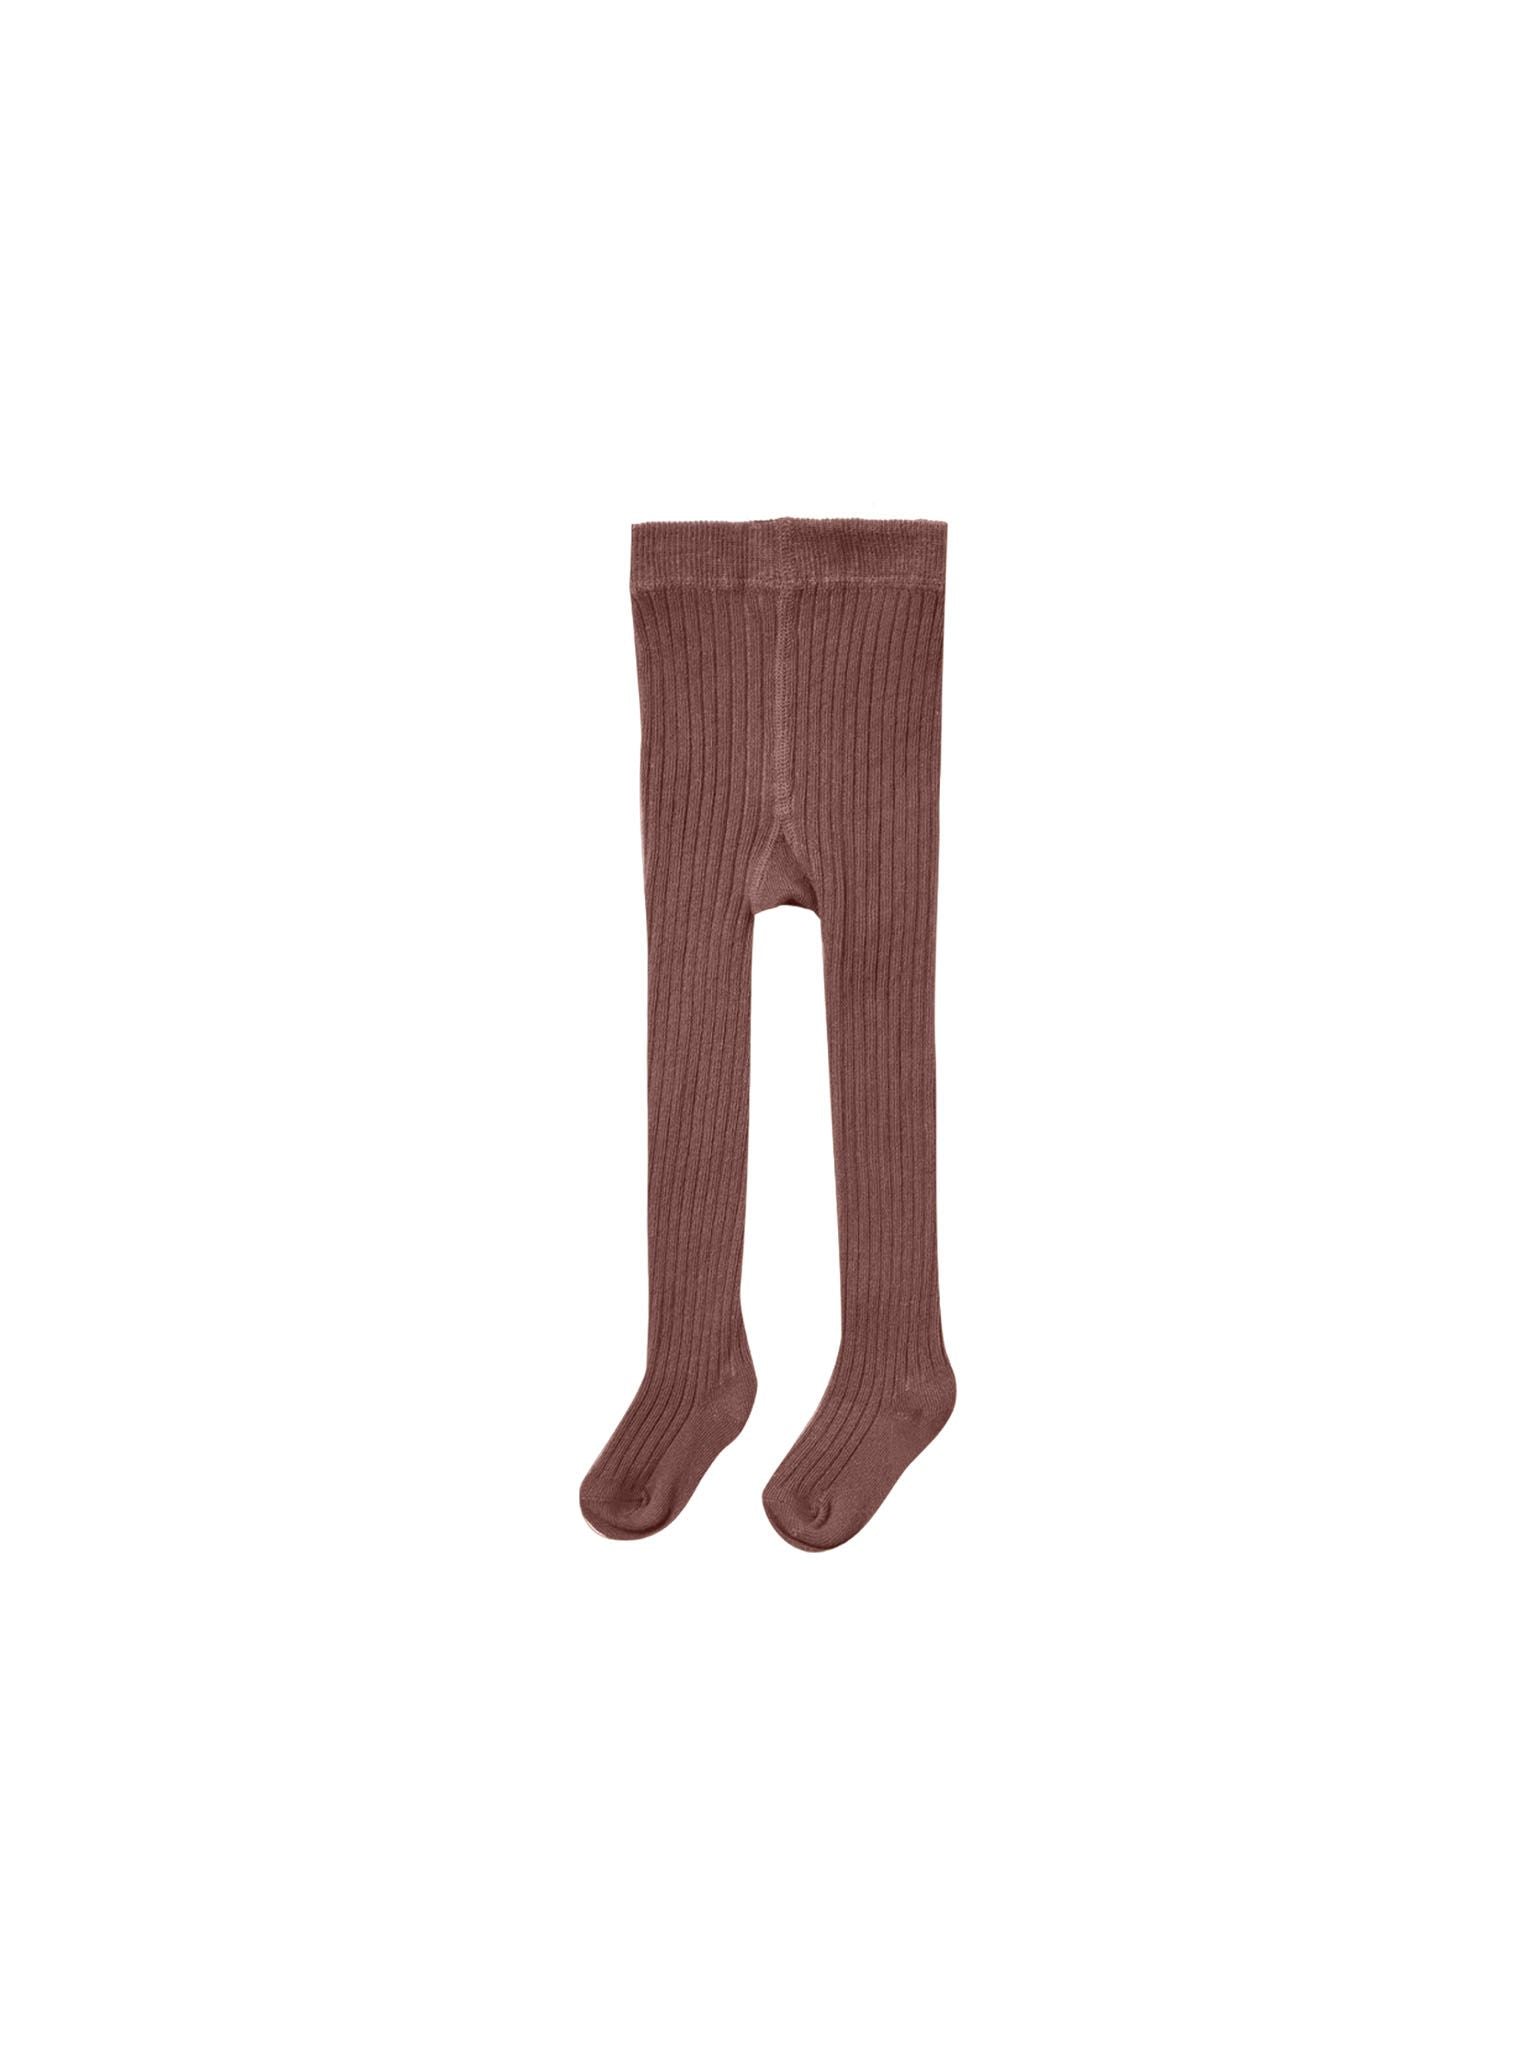 Quincy Mae Tights | Plum